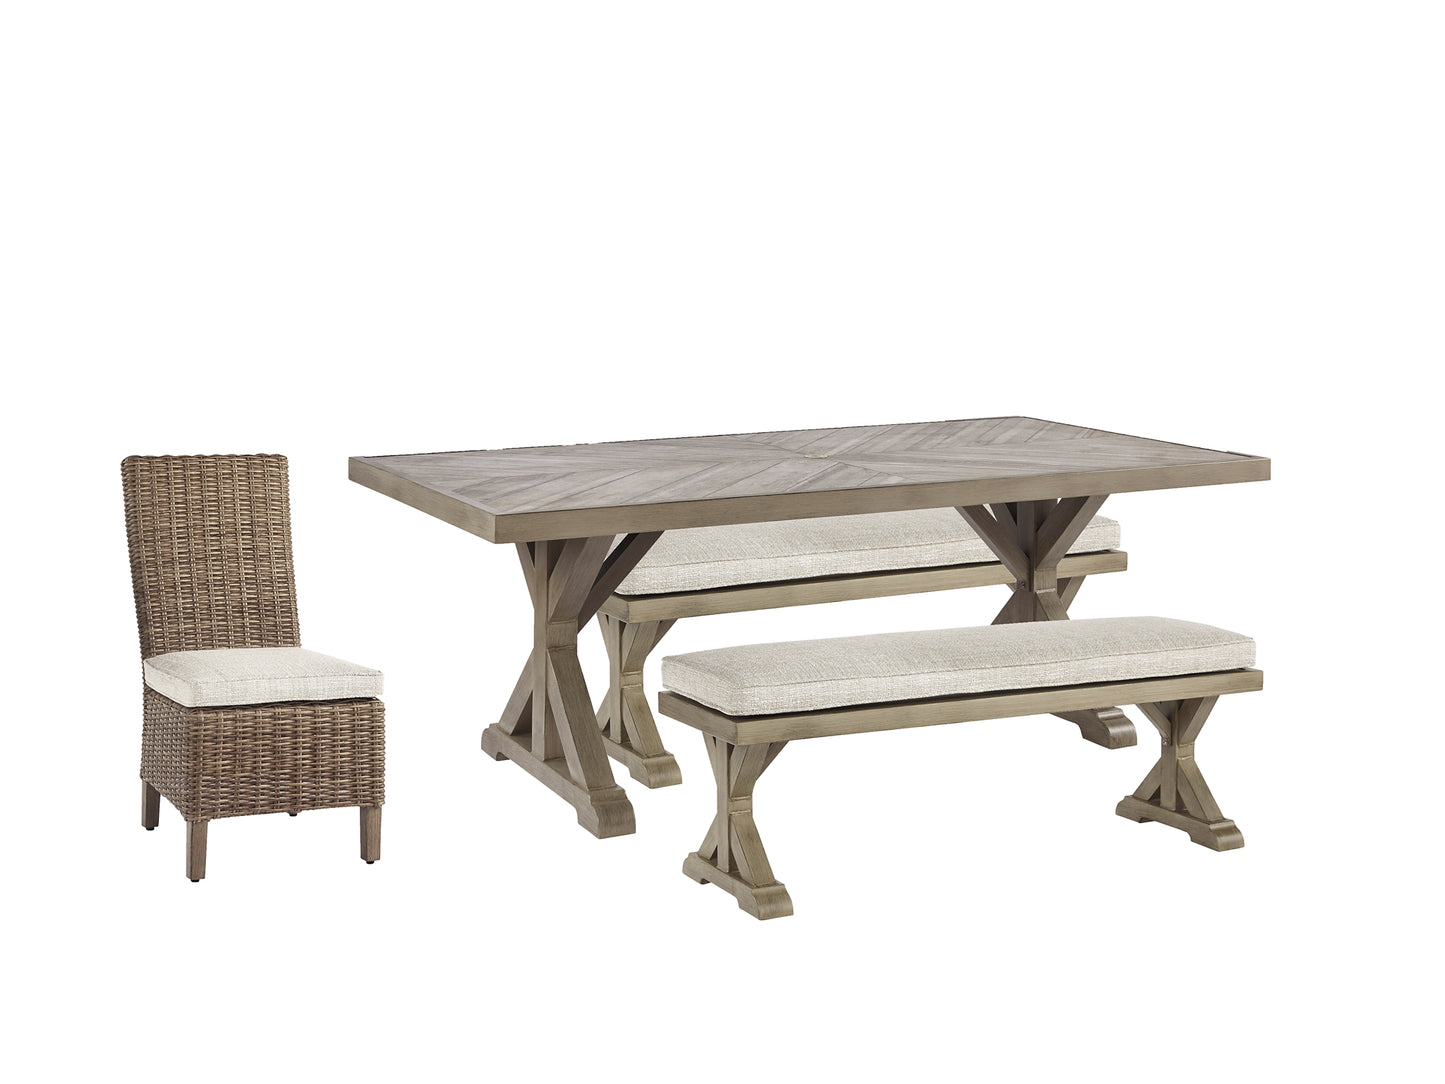 Beachcroft Outdoor Dining Table and 4 Chairs and Bench Signature Design by Ashley®